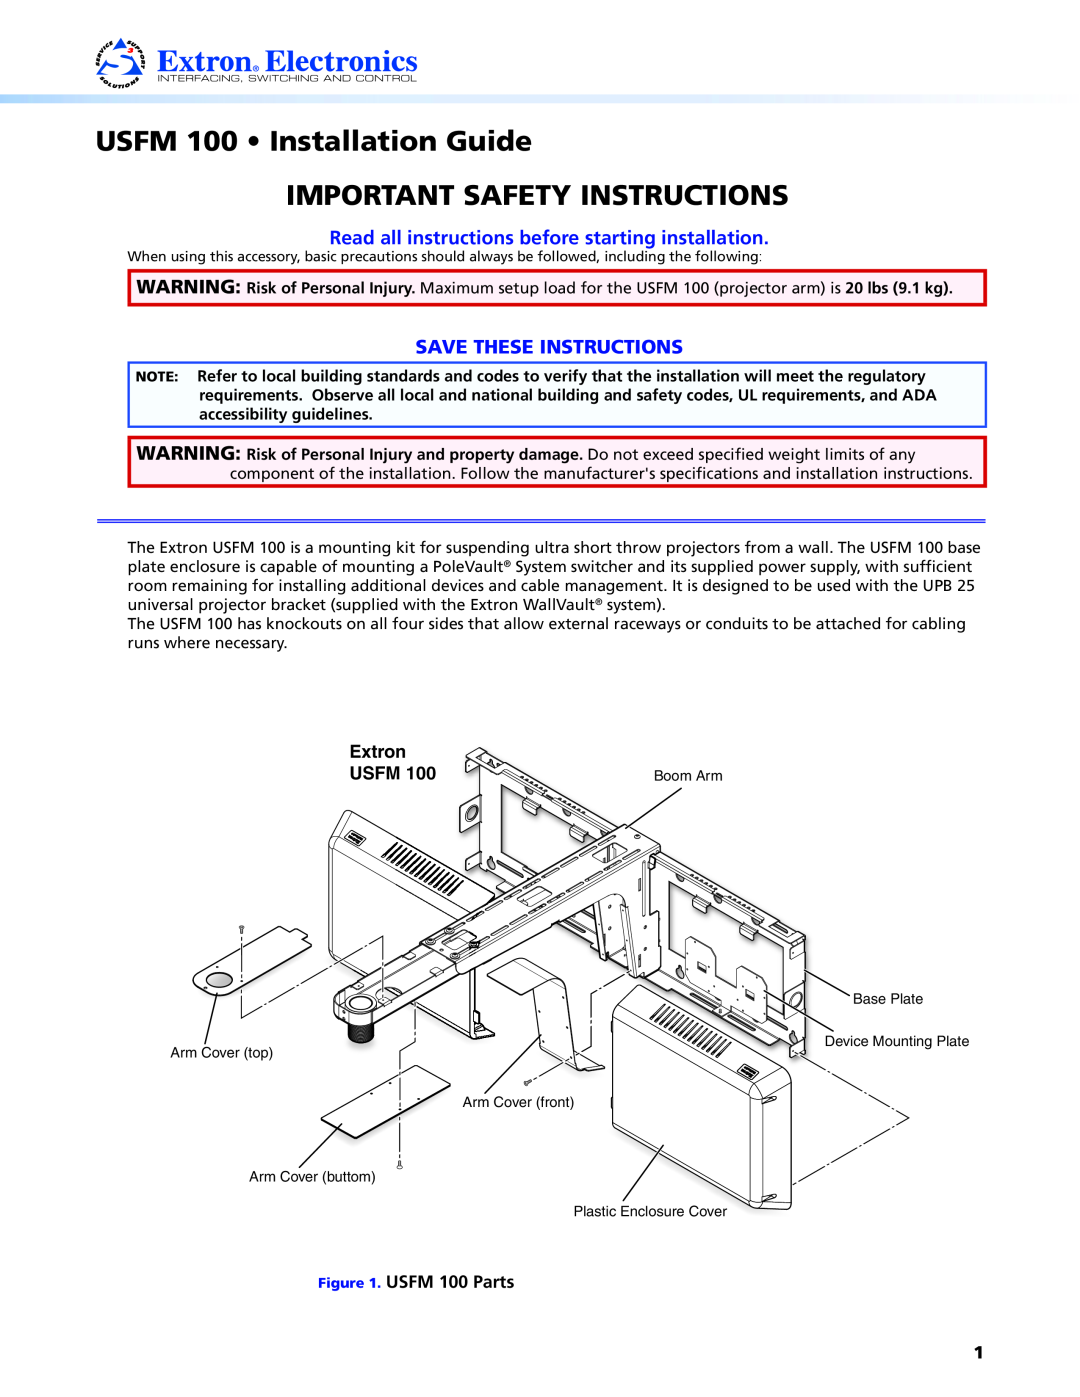 Extron electronic USFM 100 important safety instructions Read all instructions before starting installation, Extron, Usfm 